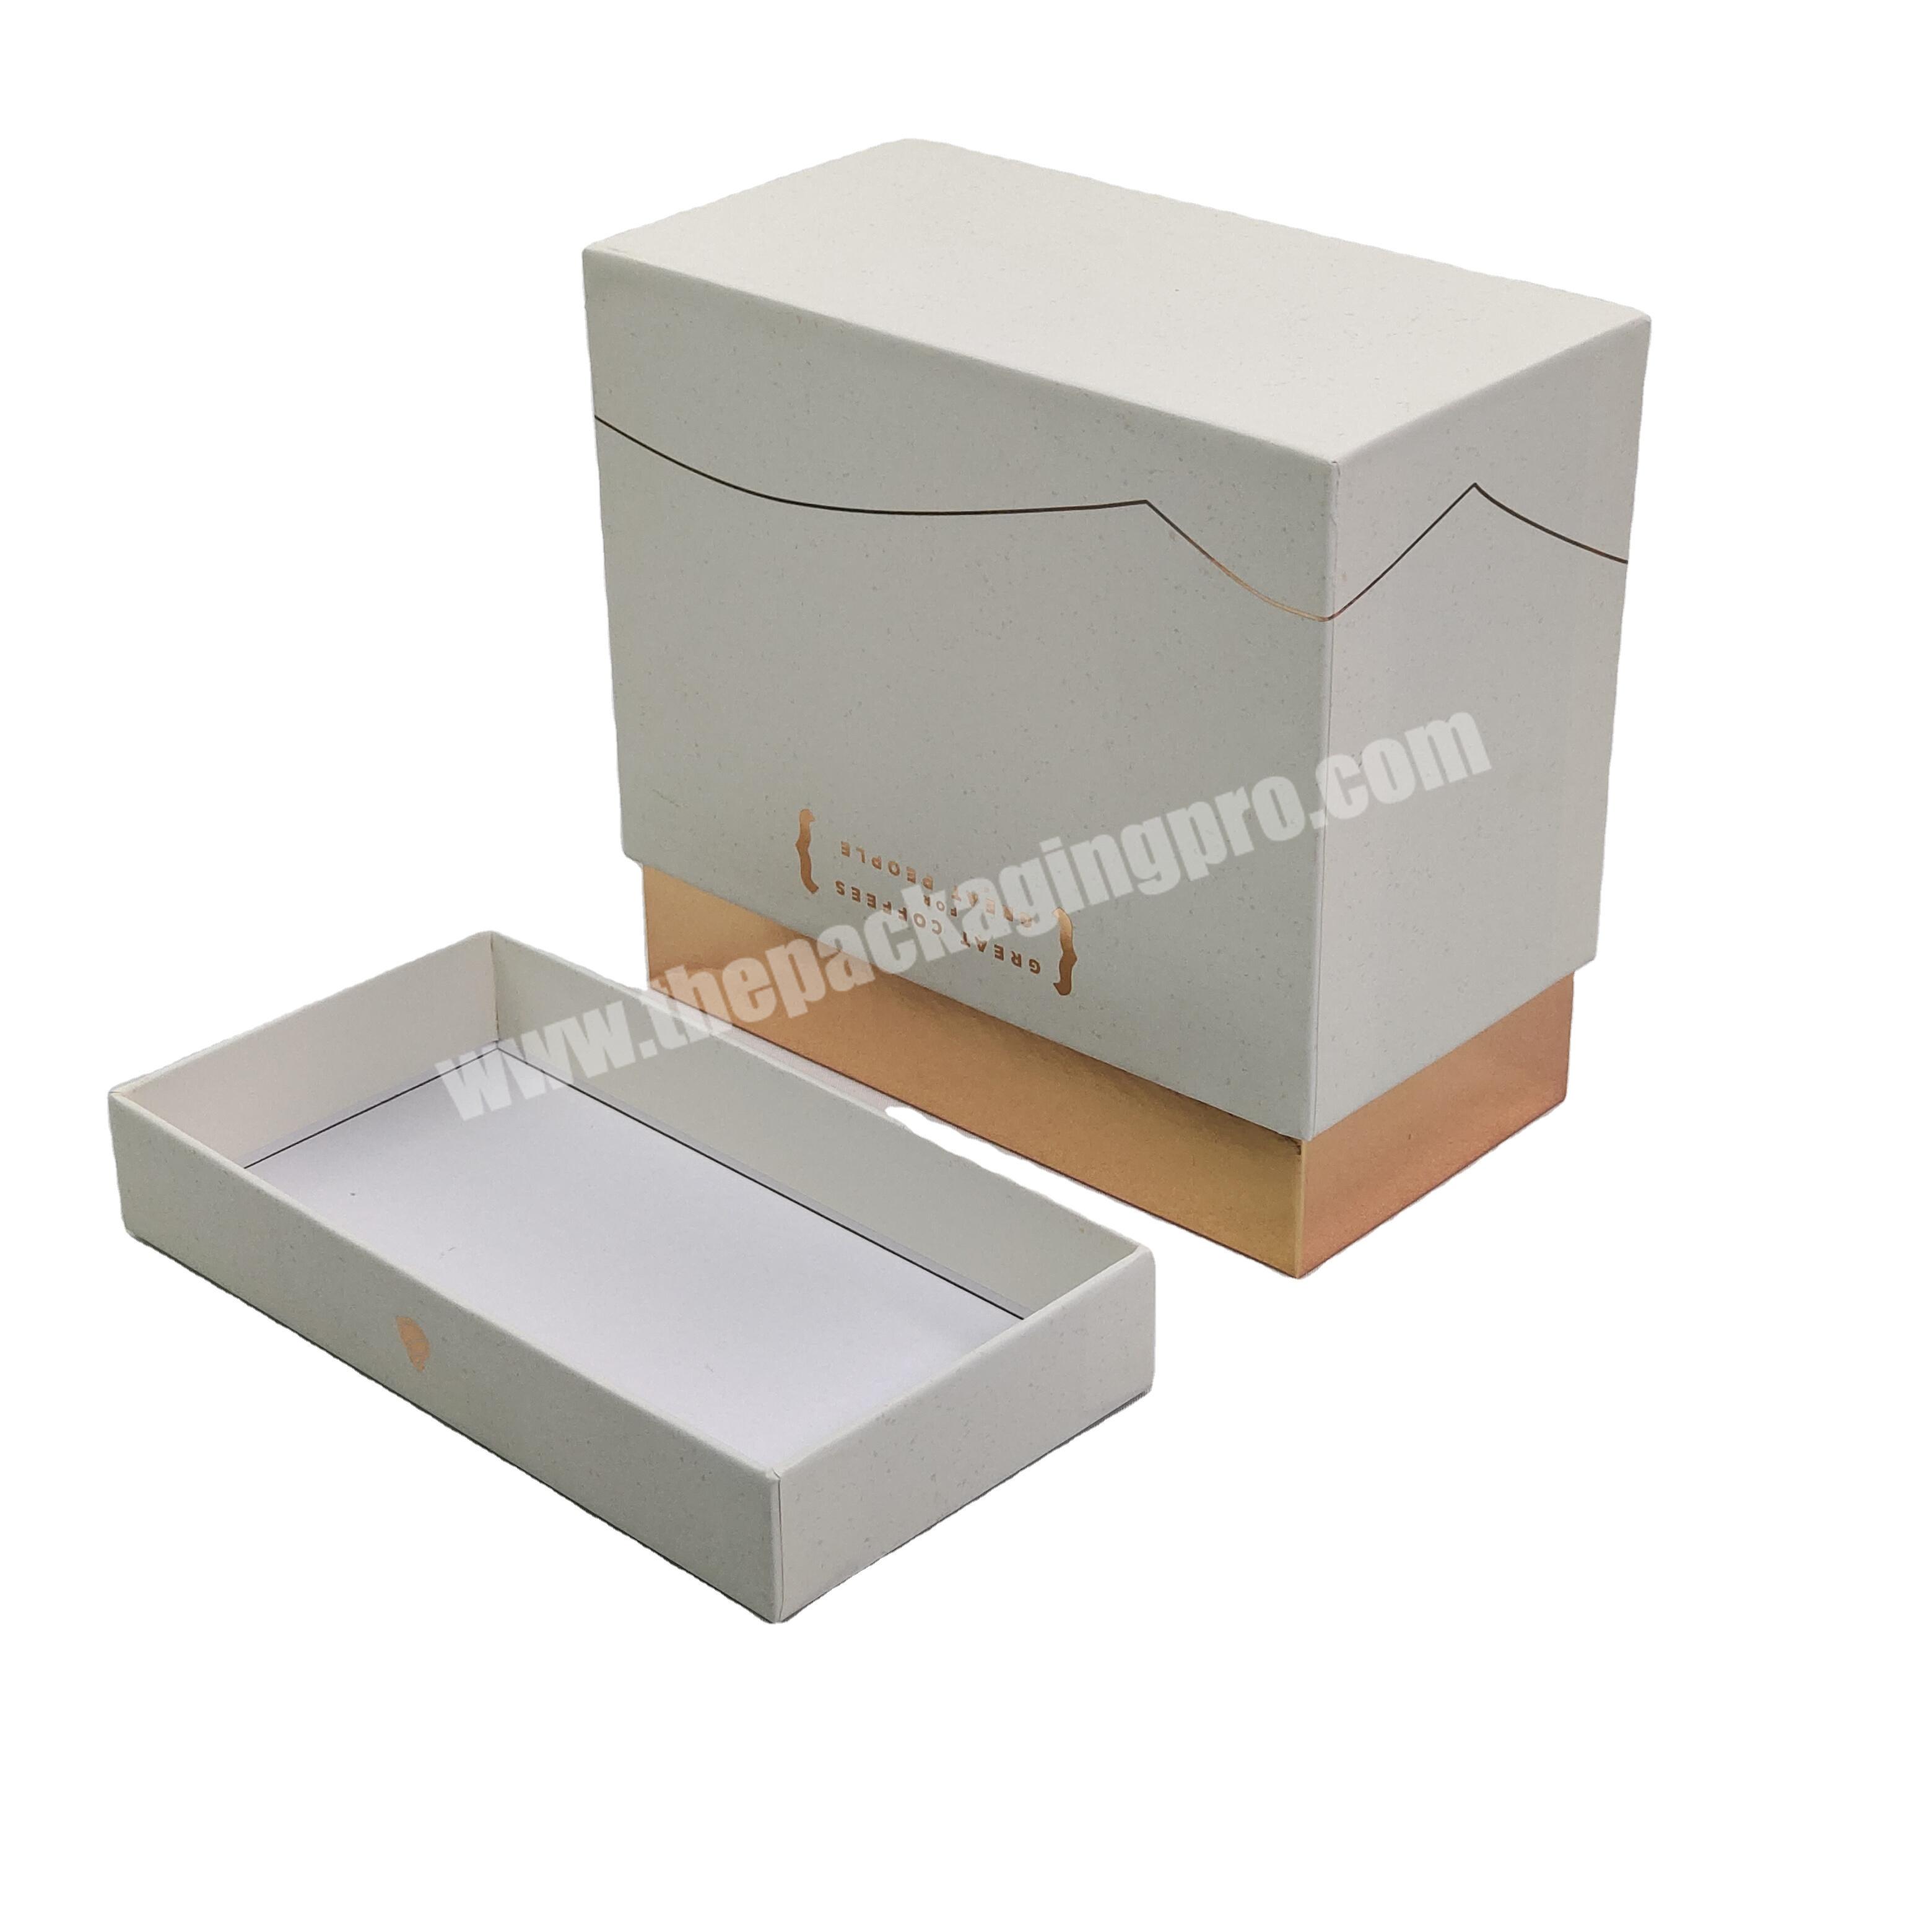 Wholesale customization of various styles of multifunctional gift boxes